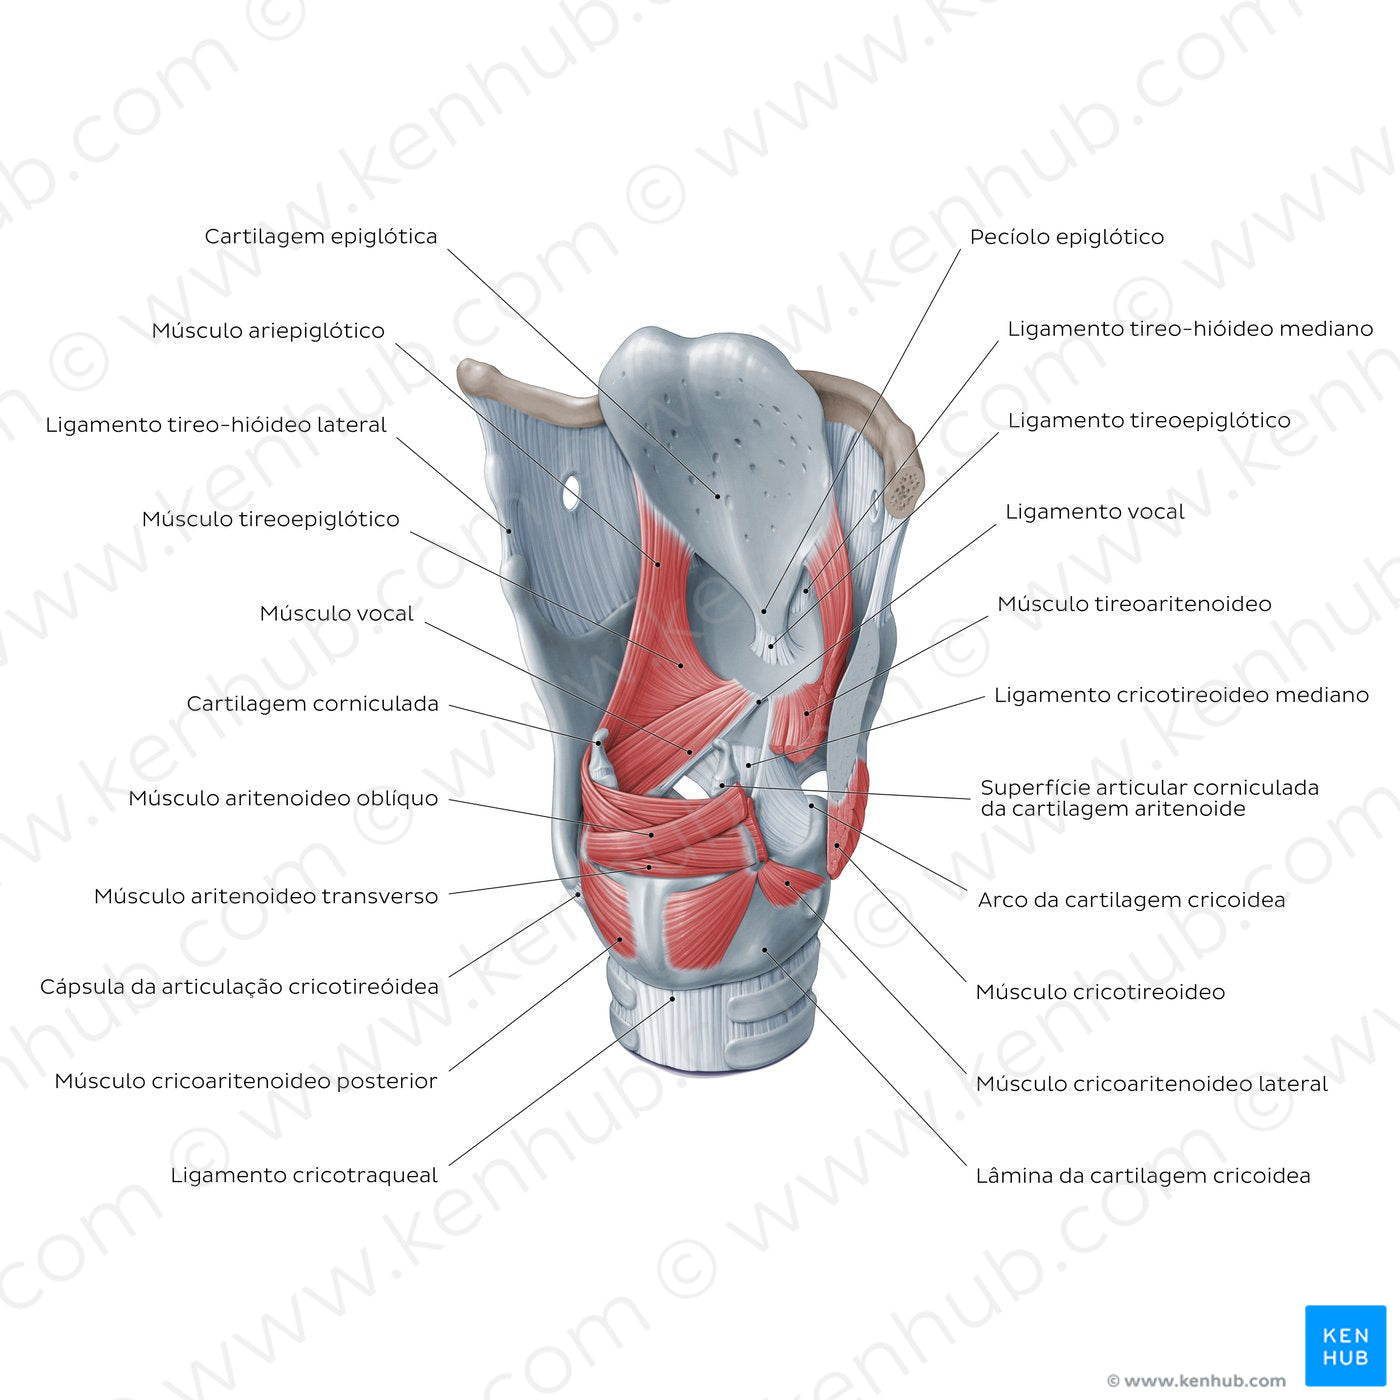 Muscles of the larynx: posterolateral view (Portuguese)